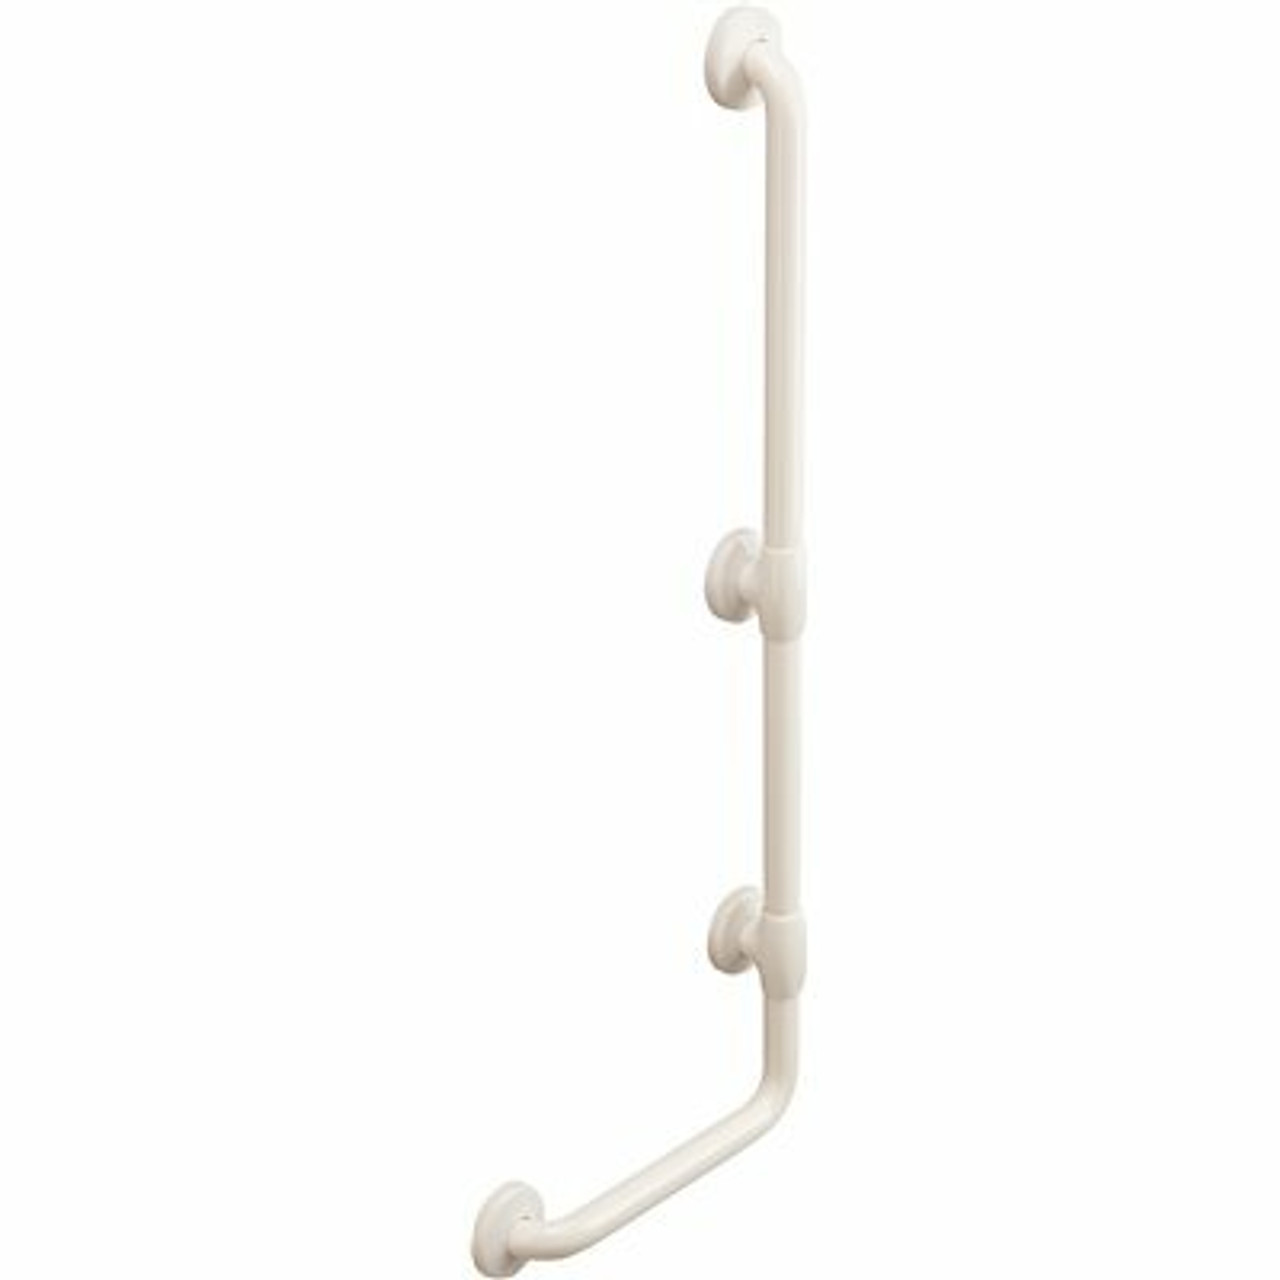 Ponte Giulio Usa 32 In. Antimicrobial Vinyl Coated L-Shape Grab Bar In White - 318113330